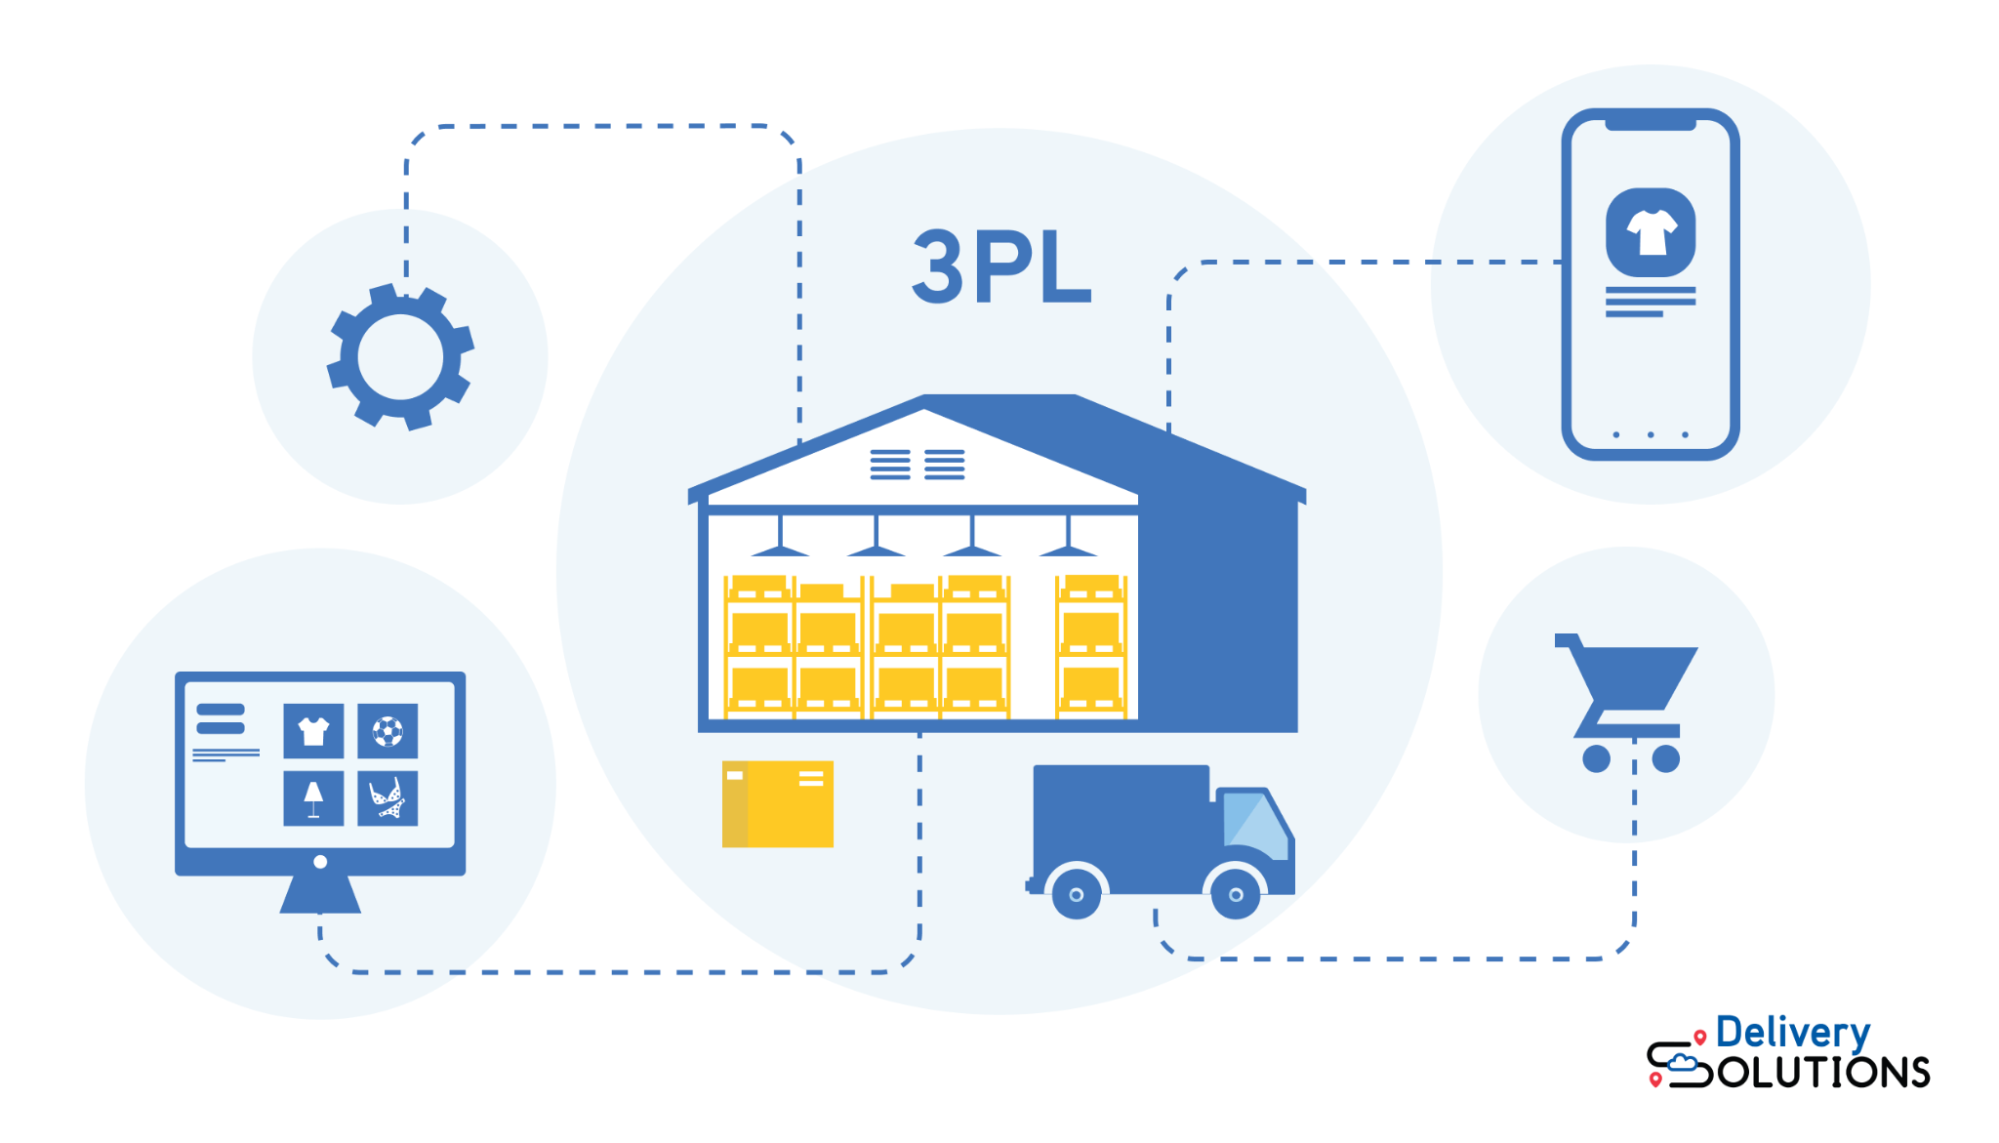 3PL connects warehouse, transport and ecommerce store